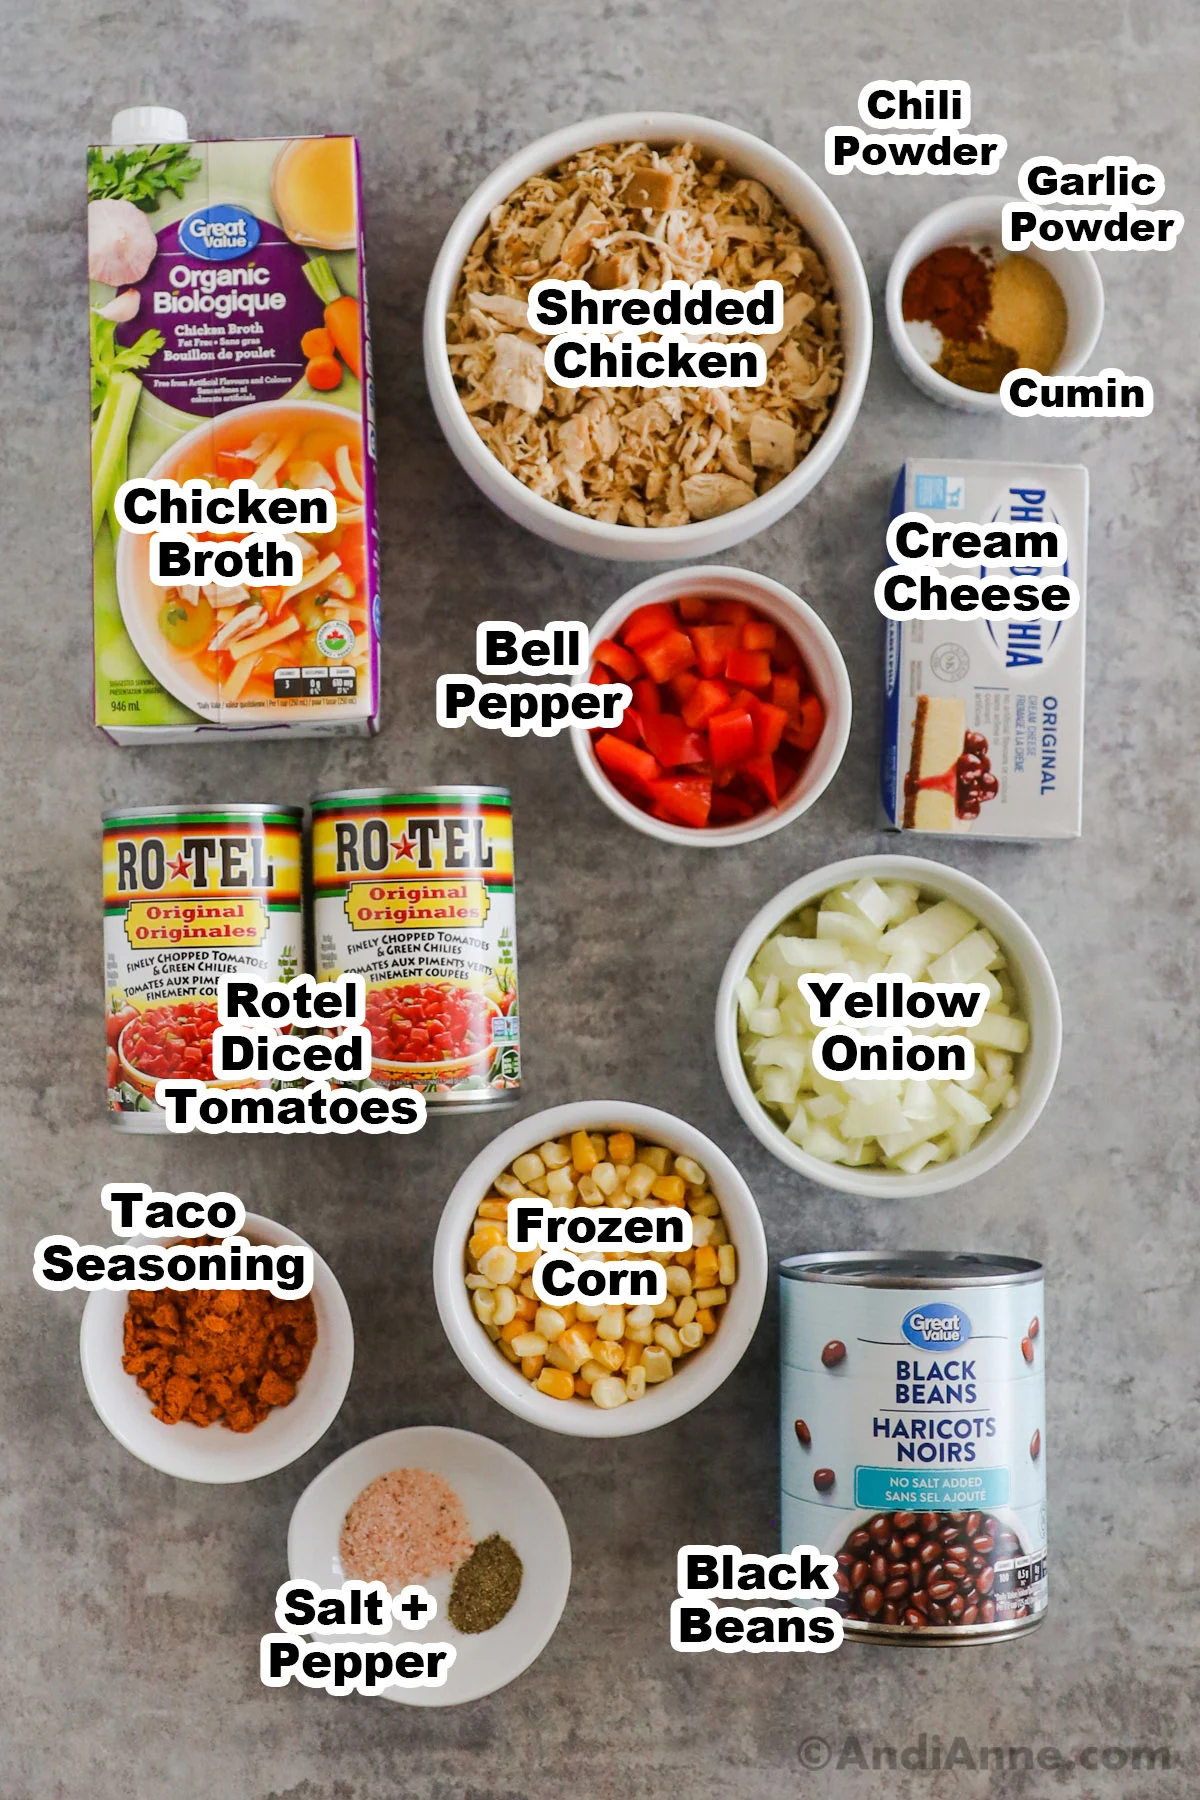 Recipe ingredients on the counter including a bowl of shredded chicken, container of chicken broth, cream cheese, chopped bell pepper, spices, chopped onion, taco seasoning, frozen corn, cans of rotel diced tomatoes with green chilies, can of black beans, salt and pepper.